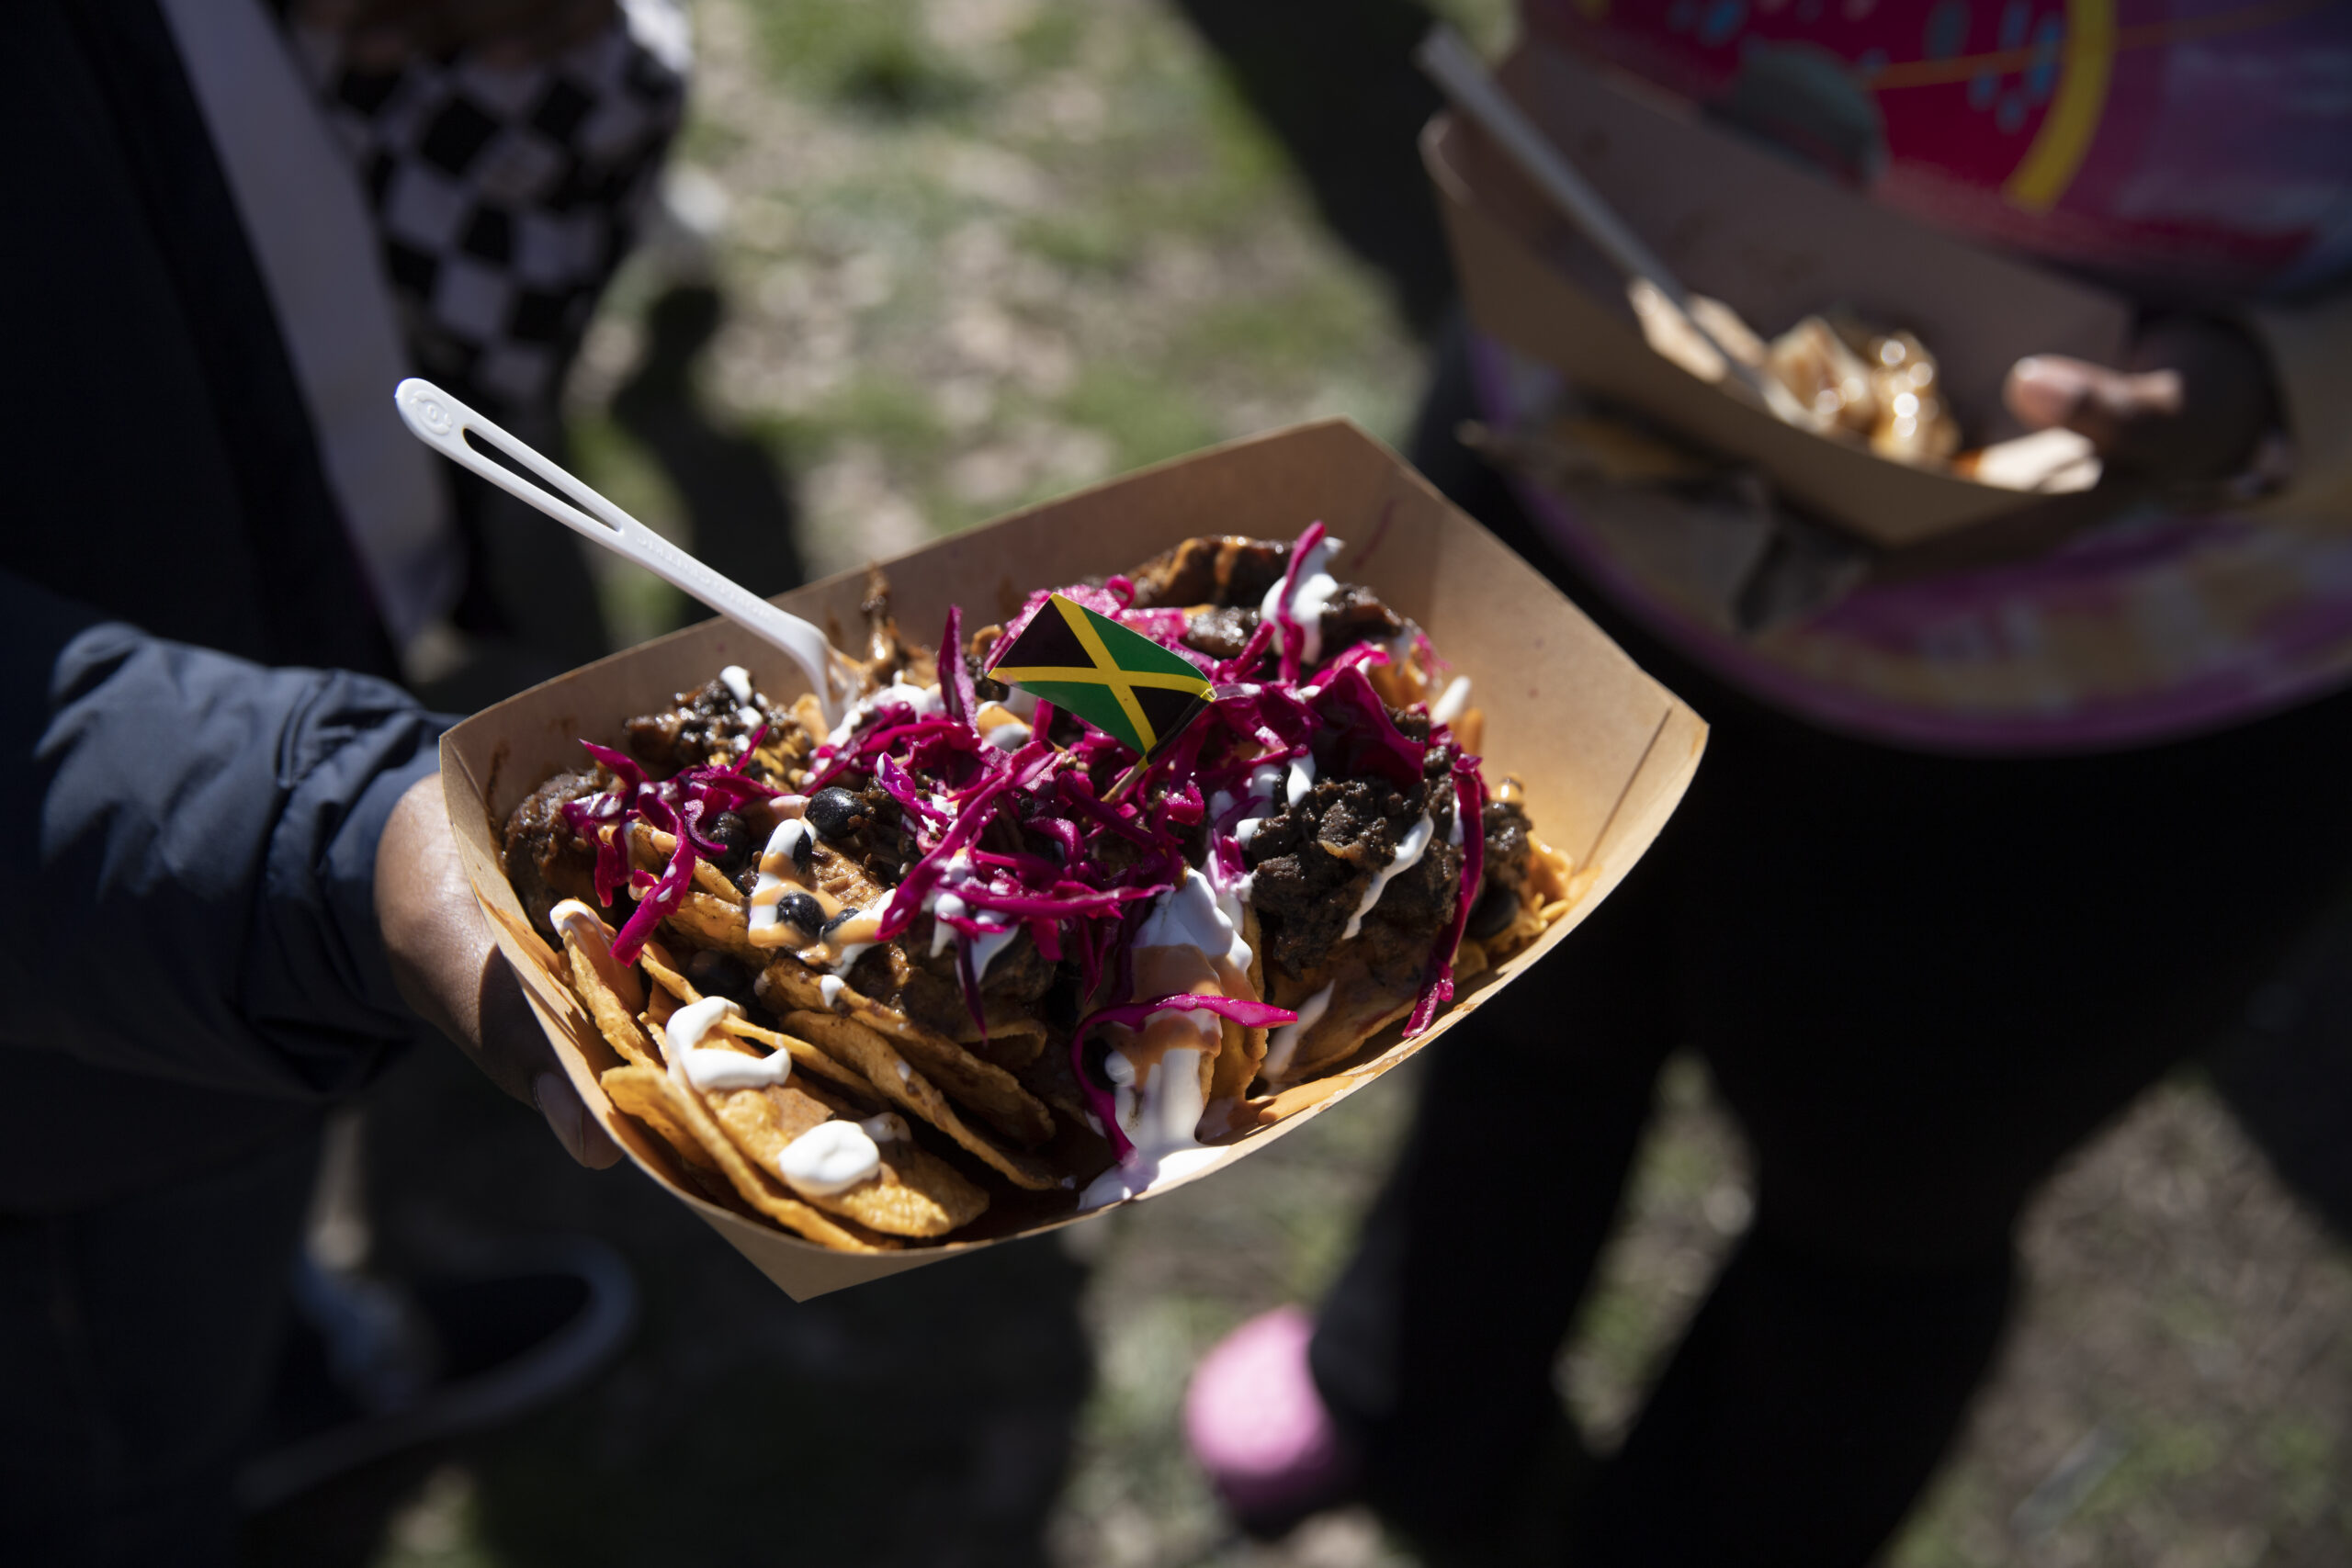 Nachos from 2 Girls and a Cookshop at Prospect Park Smorgasburg.